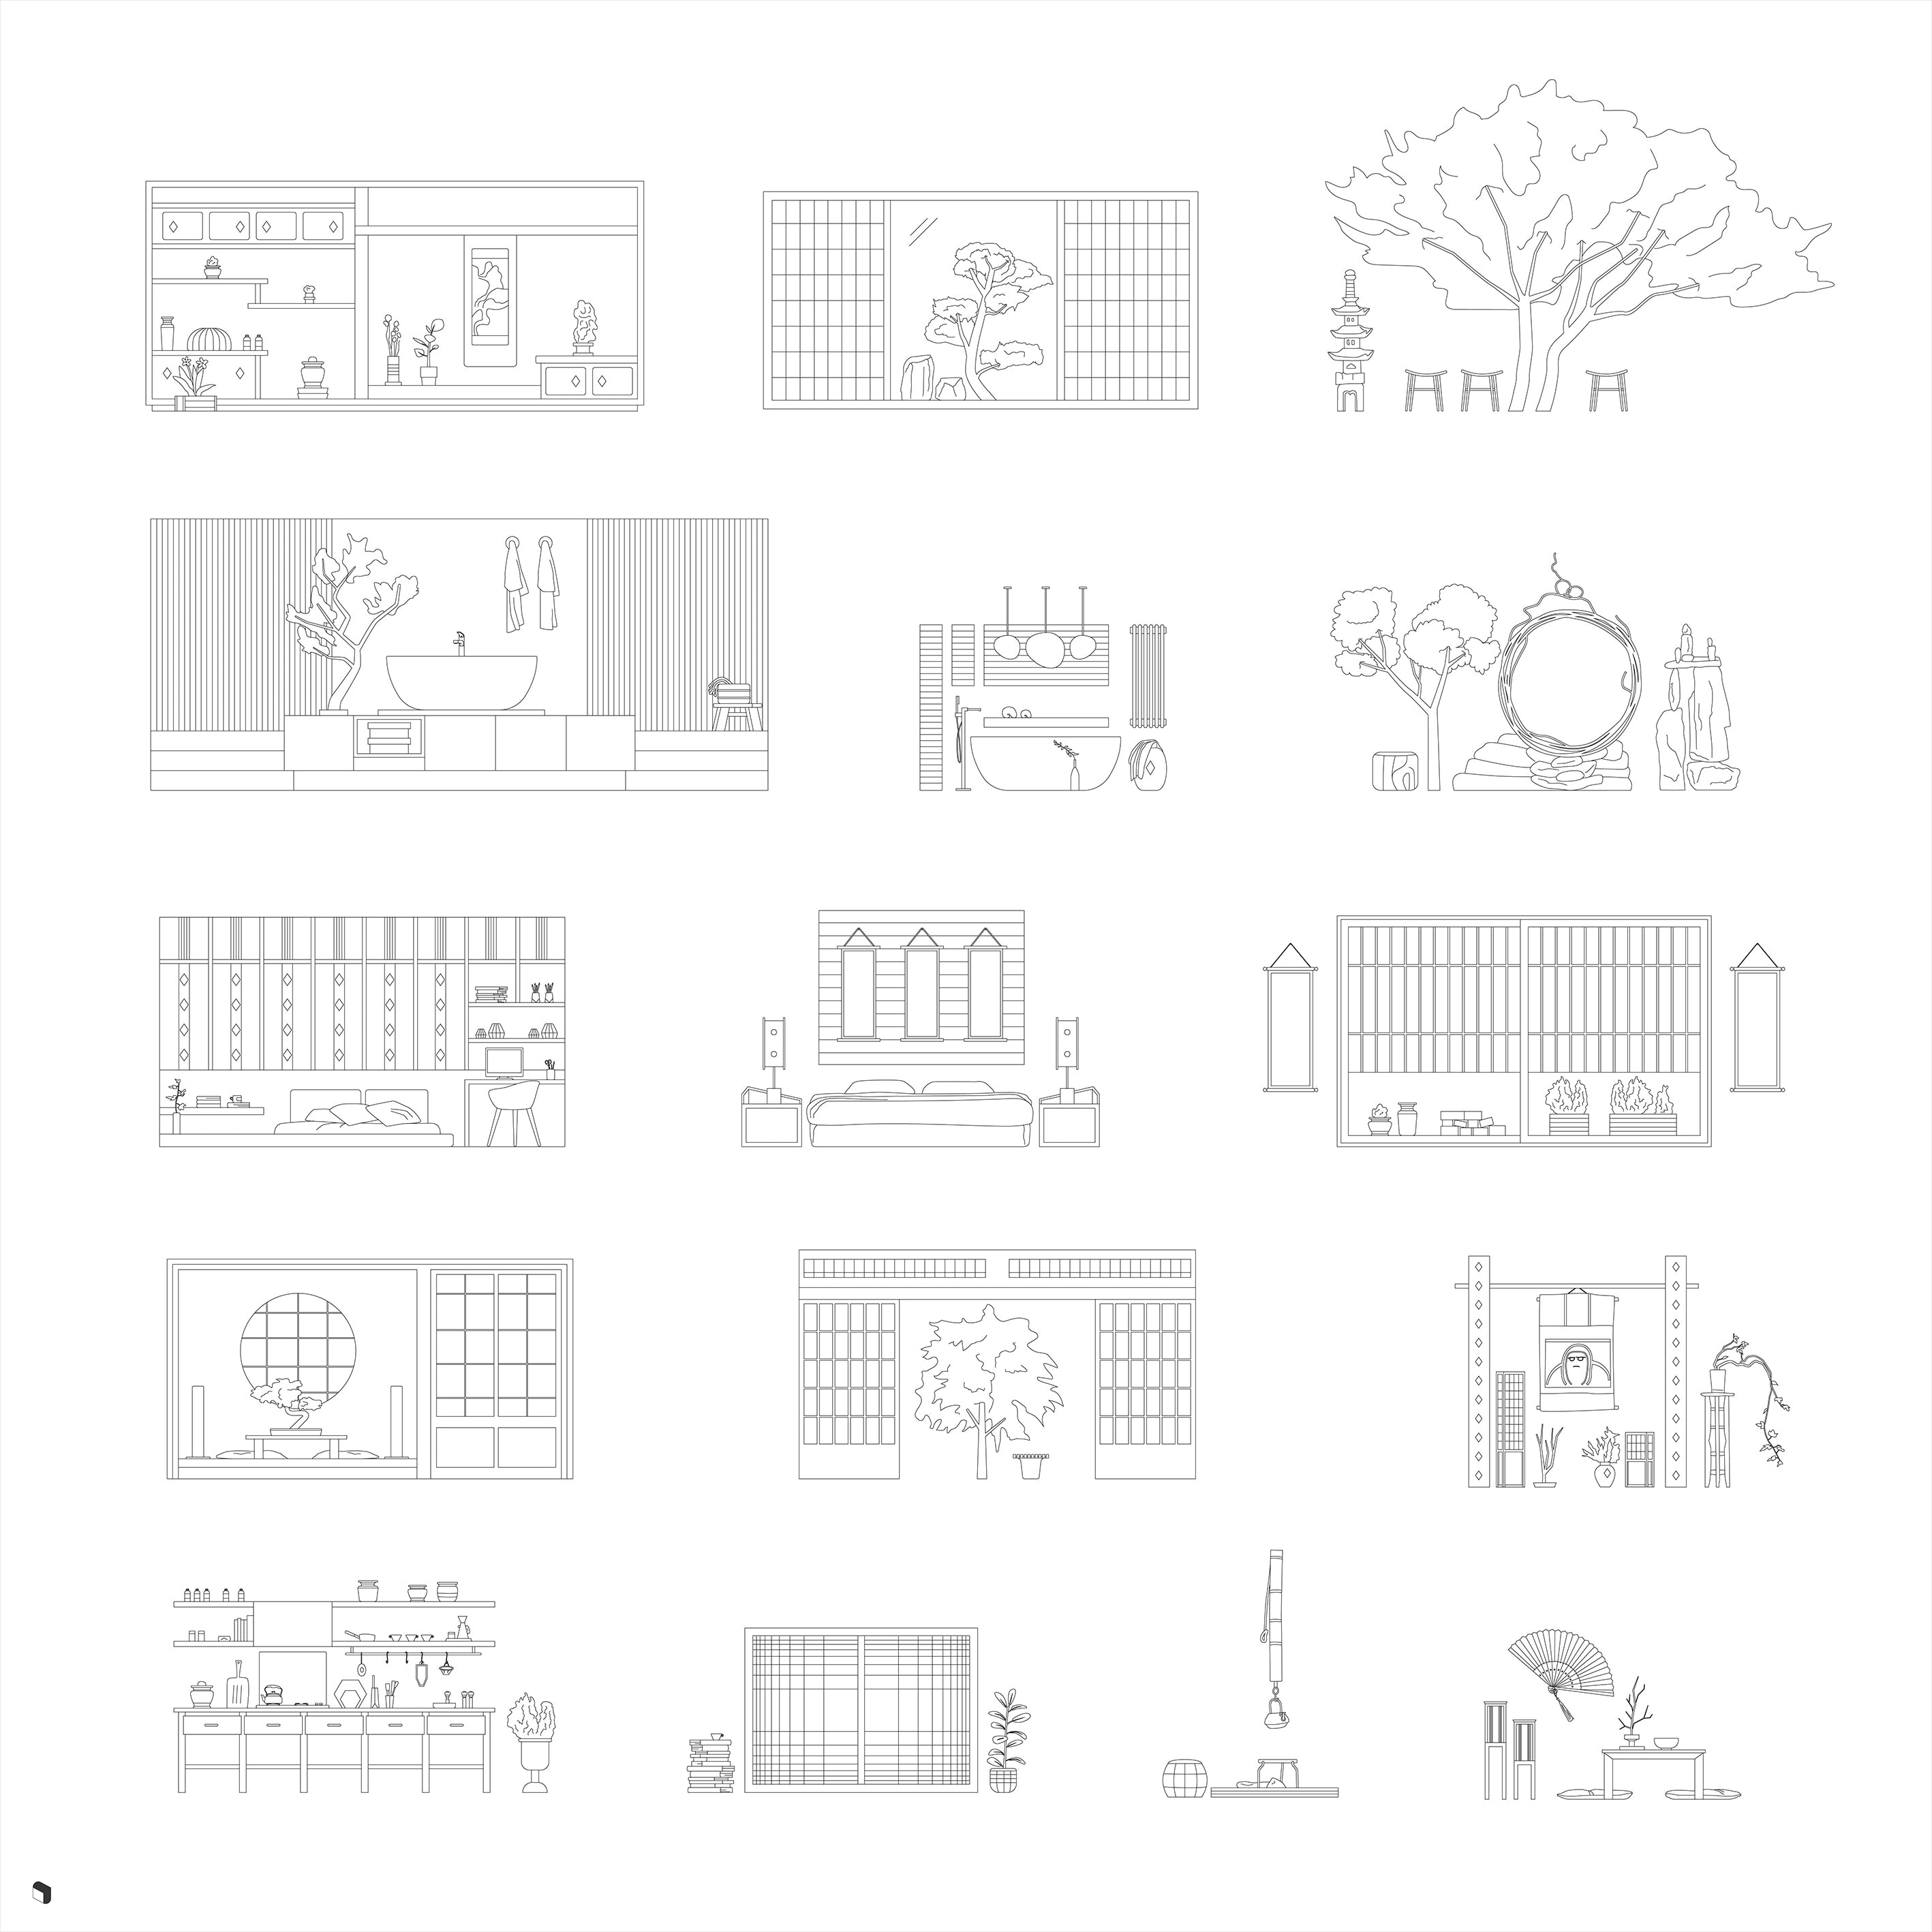 Cad Traditional Japanese House DWG | Toffu Co